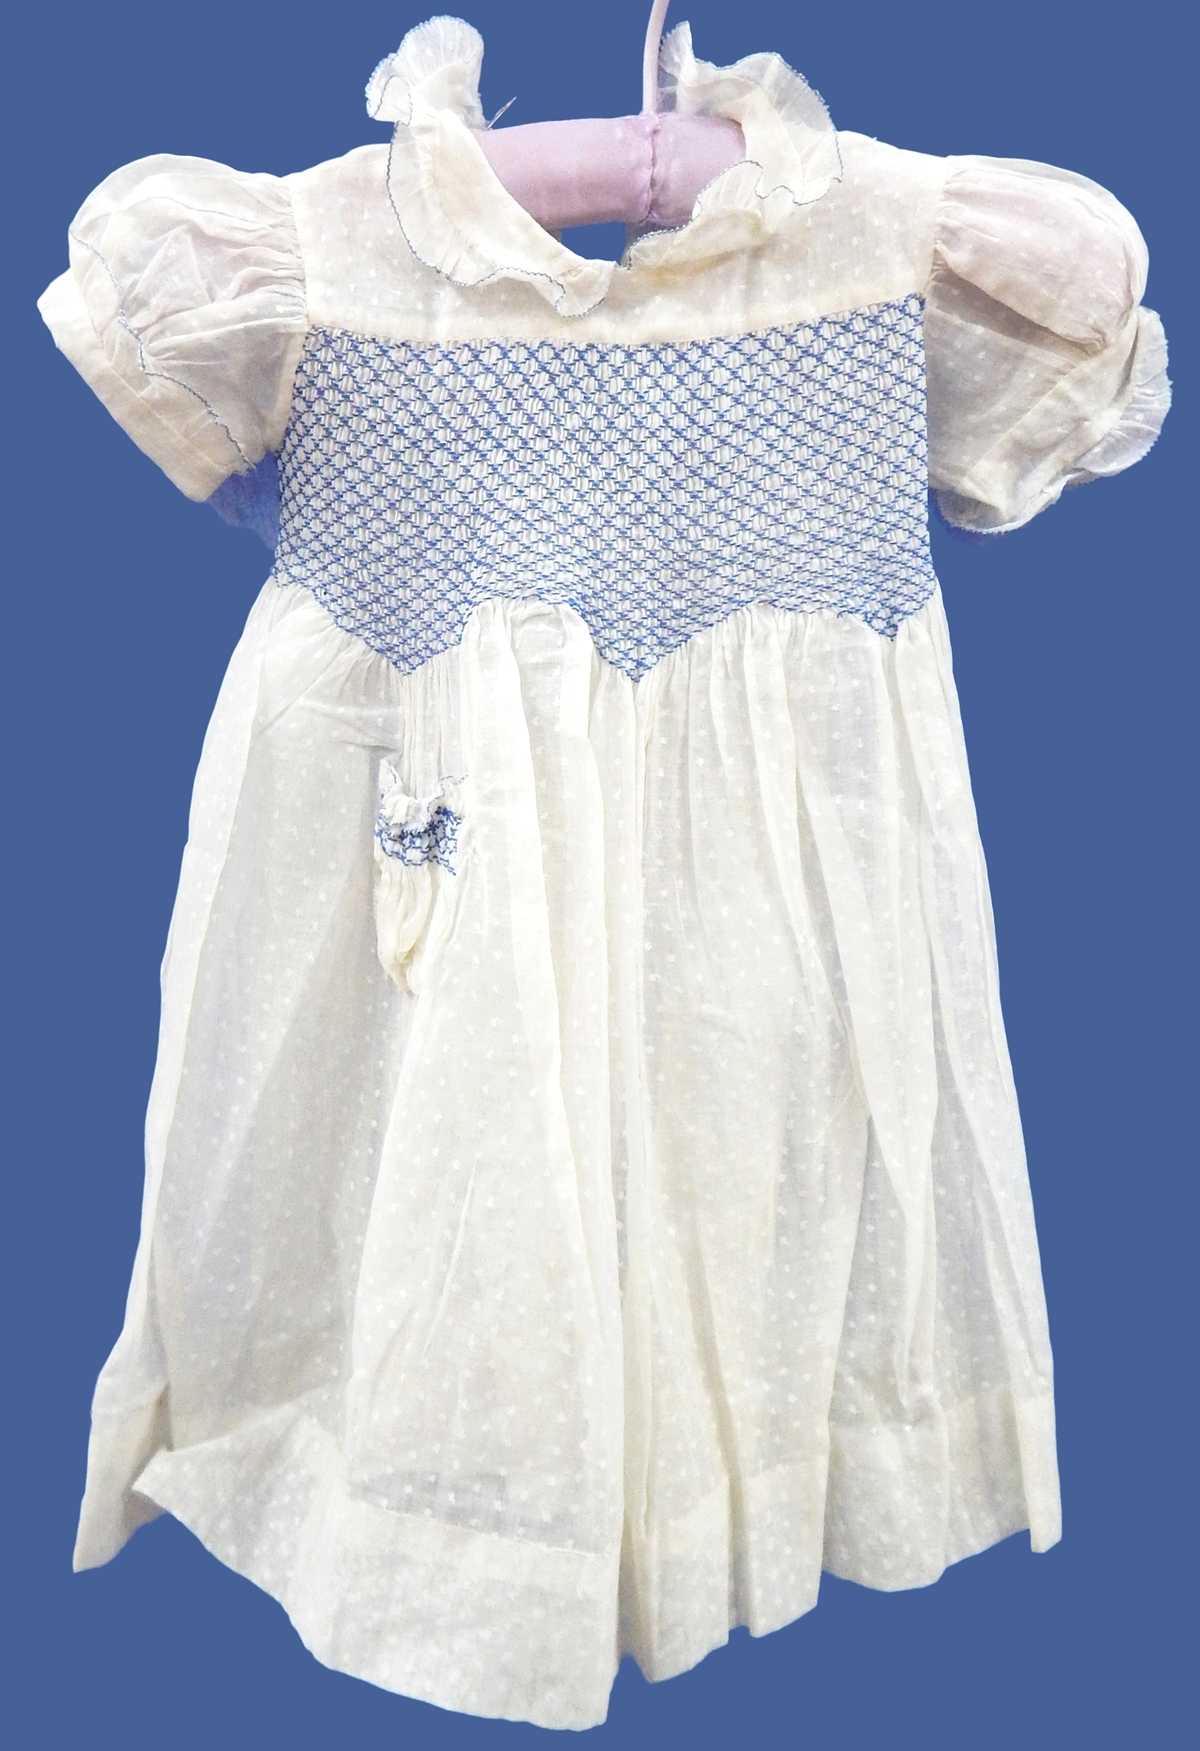 Various 1940's or earlier child's dresses including a cream figured muslin with blue smocking